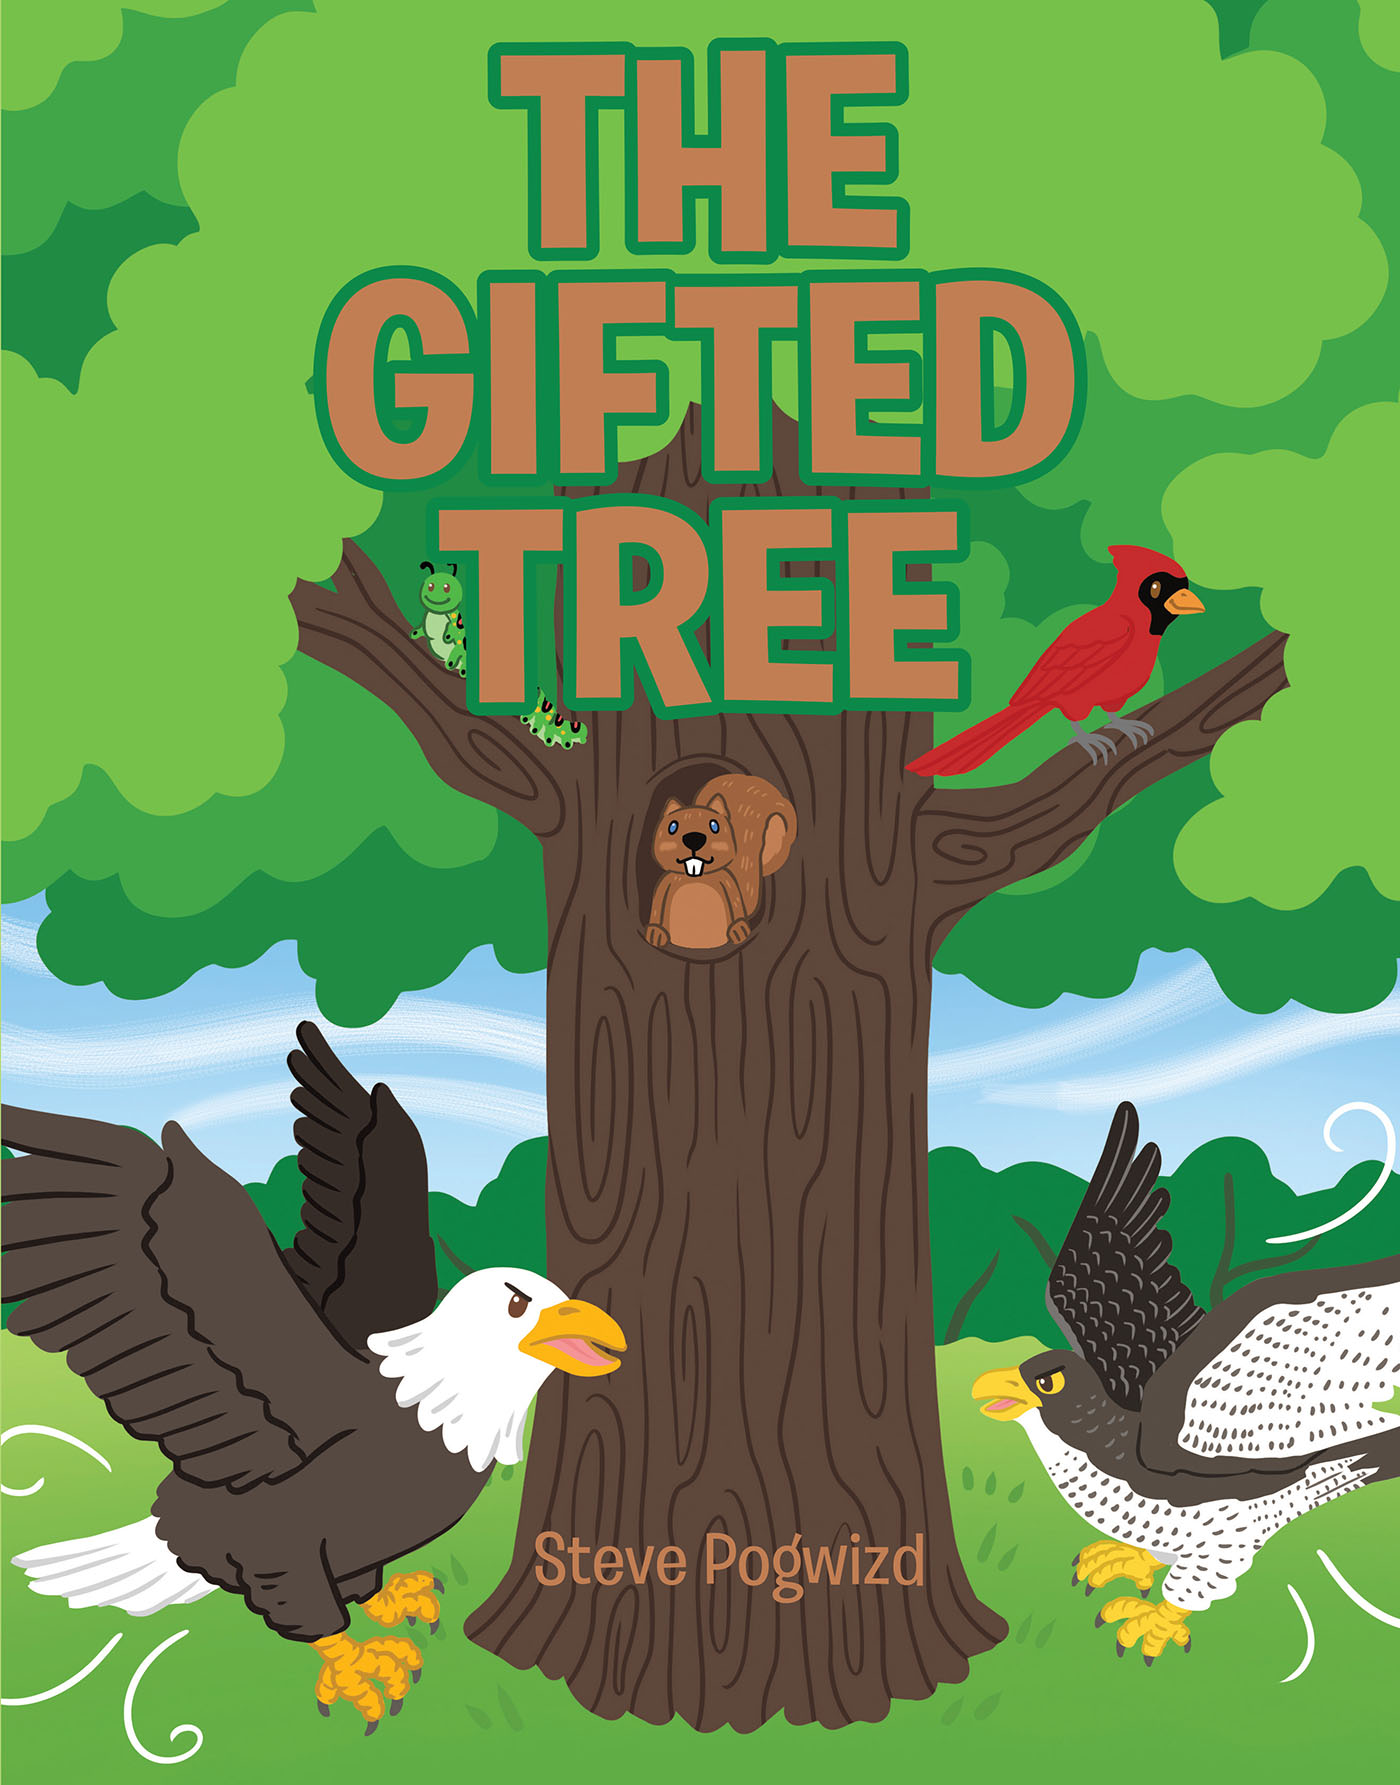 Author Steve Pogwizd’s New Book, "The Gifted Tree," is a Captivating Story of Friendship & Kindness That Follows a Group of Animals Who Band Together to Help One Another